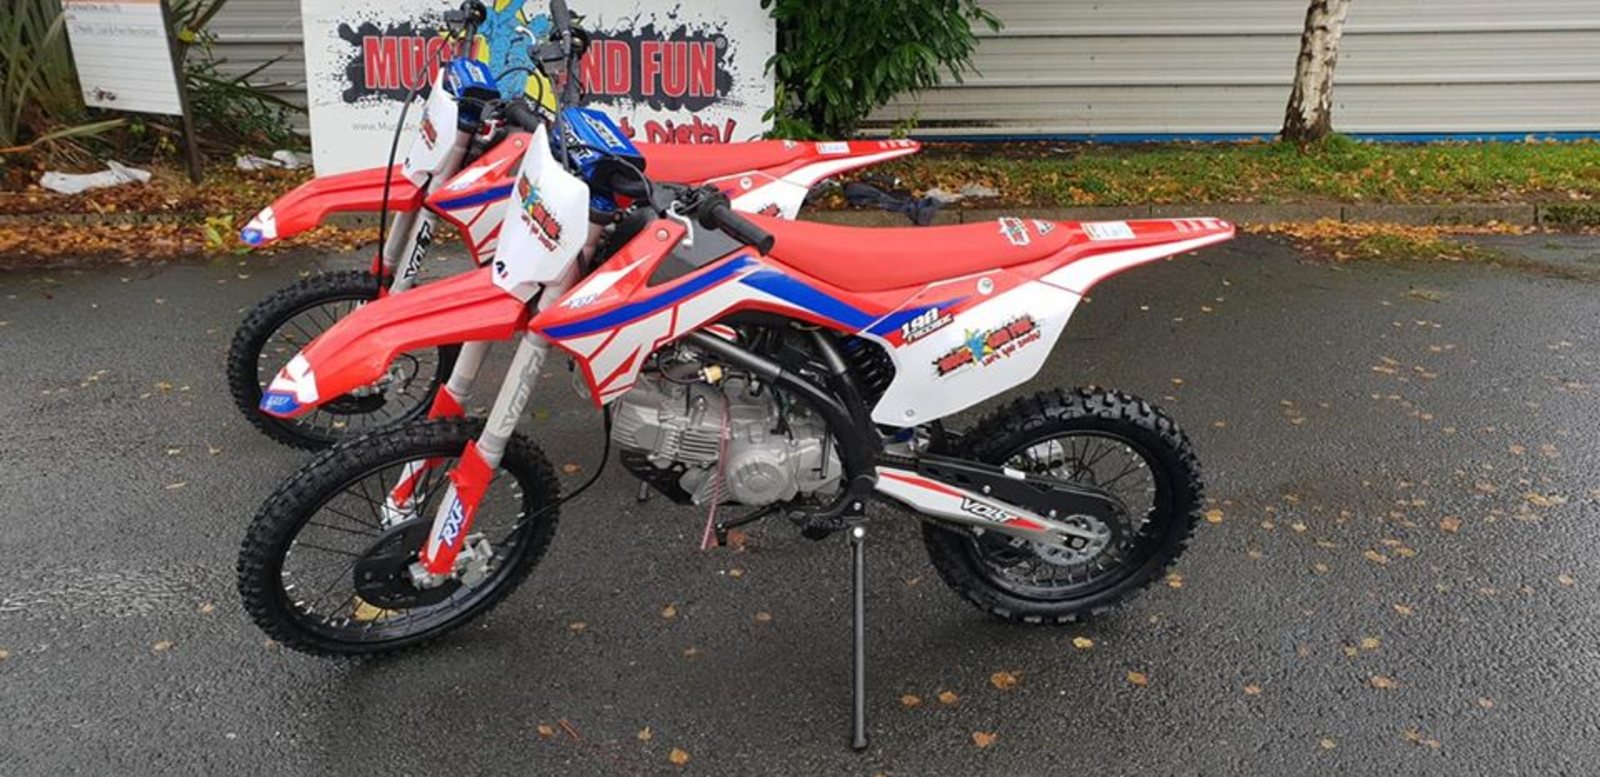 RXF 190 Dirt bike (70MPH/DELIVERY/CHOICE/MUCK+FUN